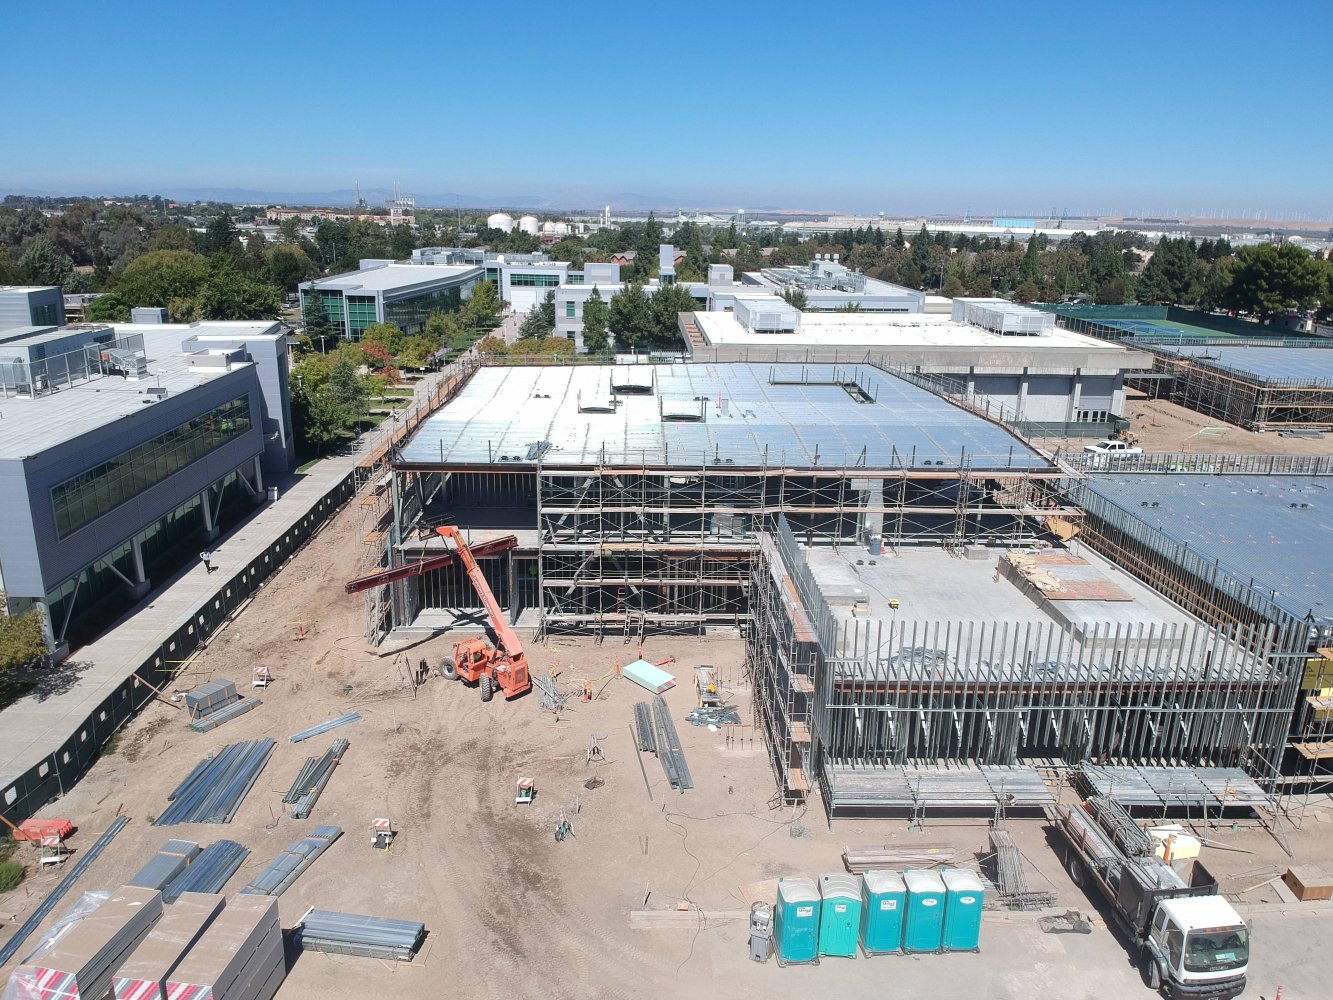 LMC Construction on 9/11/18 photo by Lilly Montero